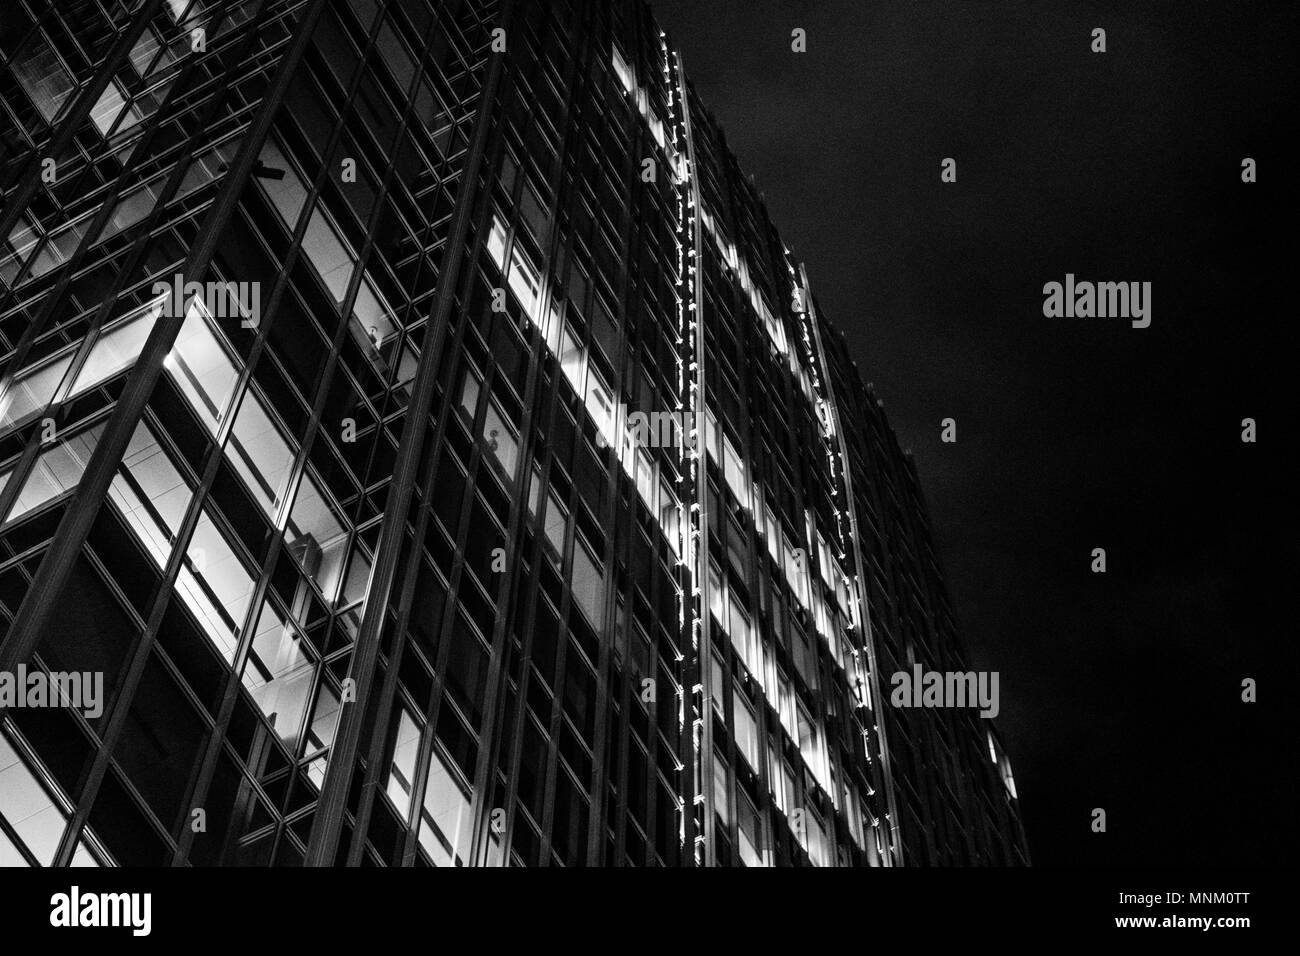 A black and white photo of a skyscraper with added grain to give a noire, old film look Stock Photo